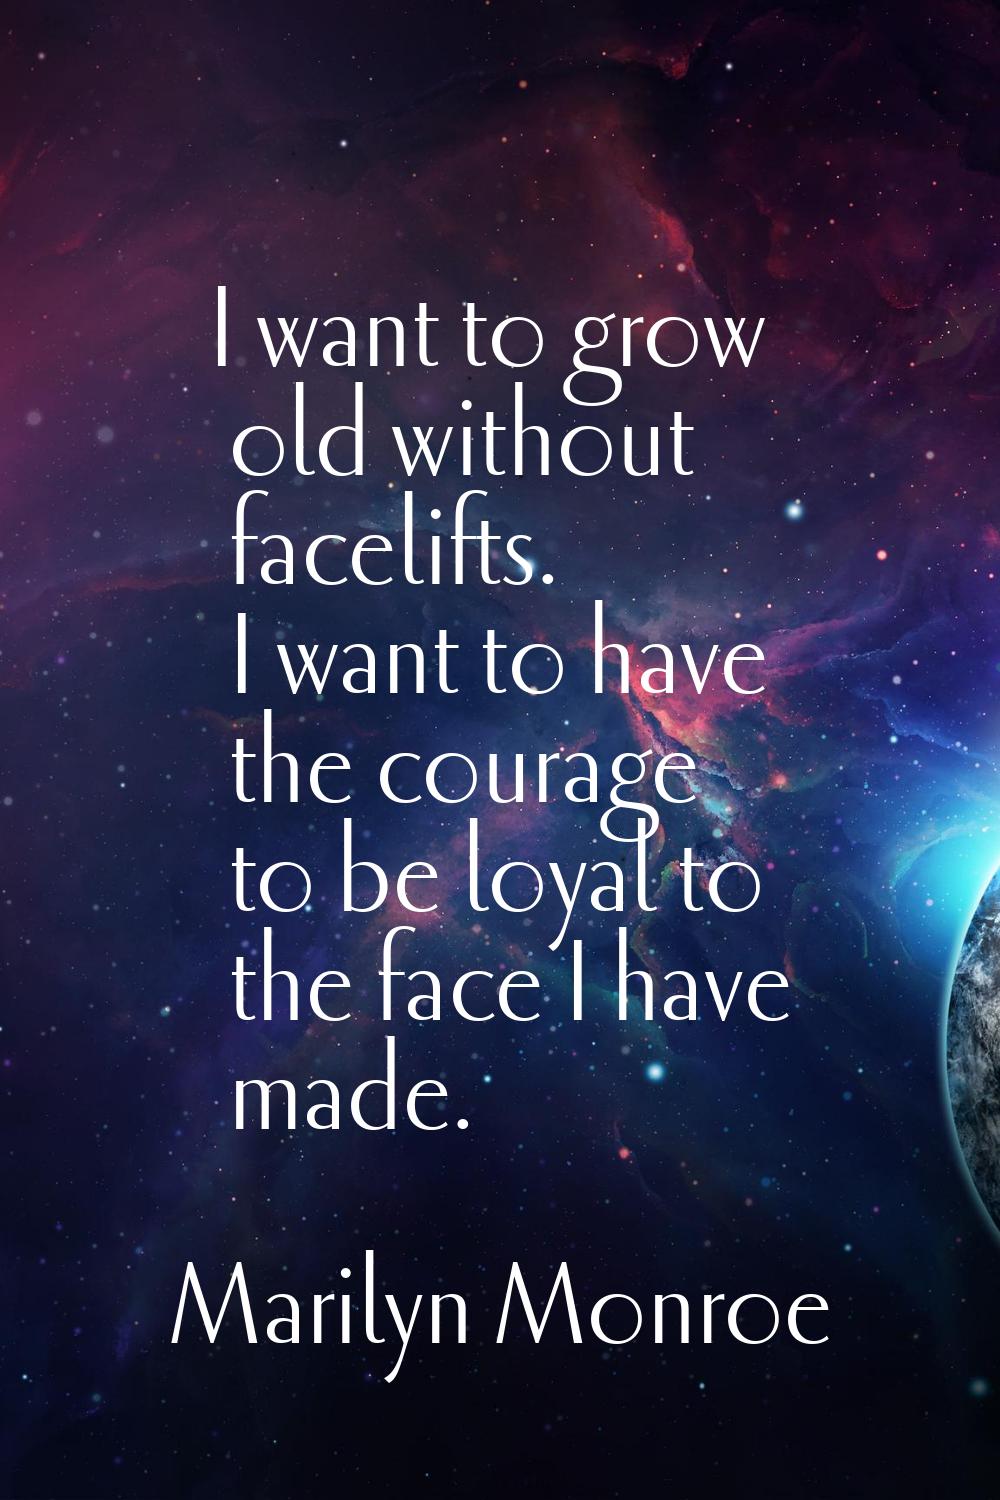 I want to grow old without facelifts. I want to have the courage to be loyal to the face I have mad